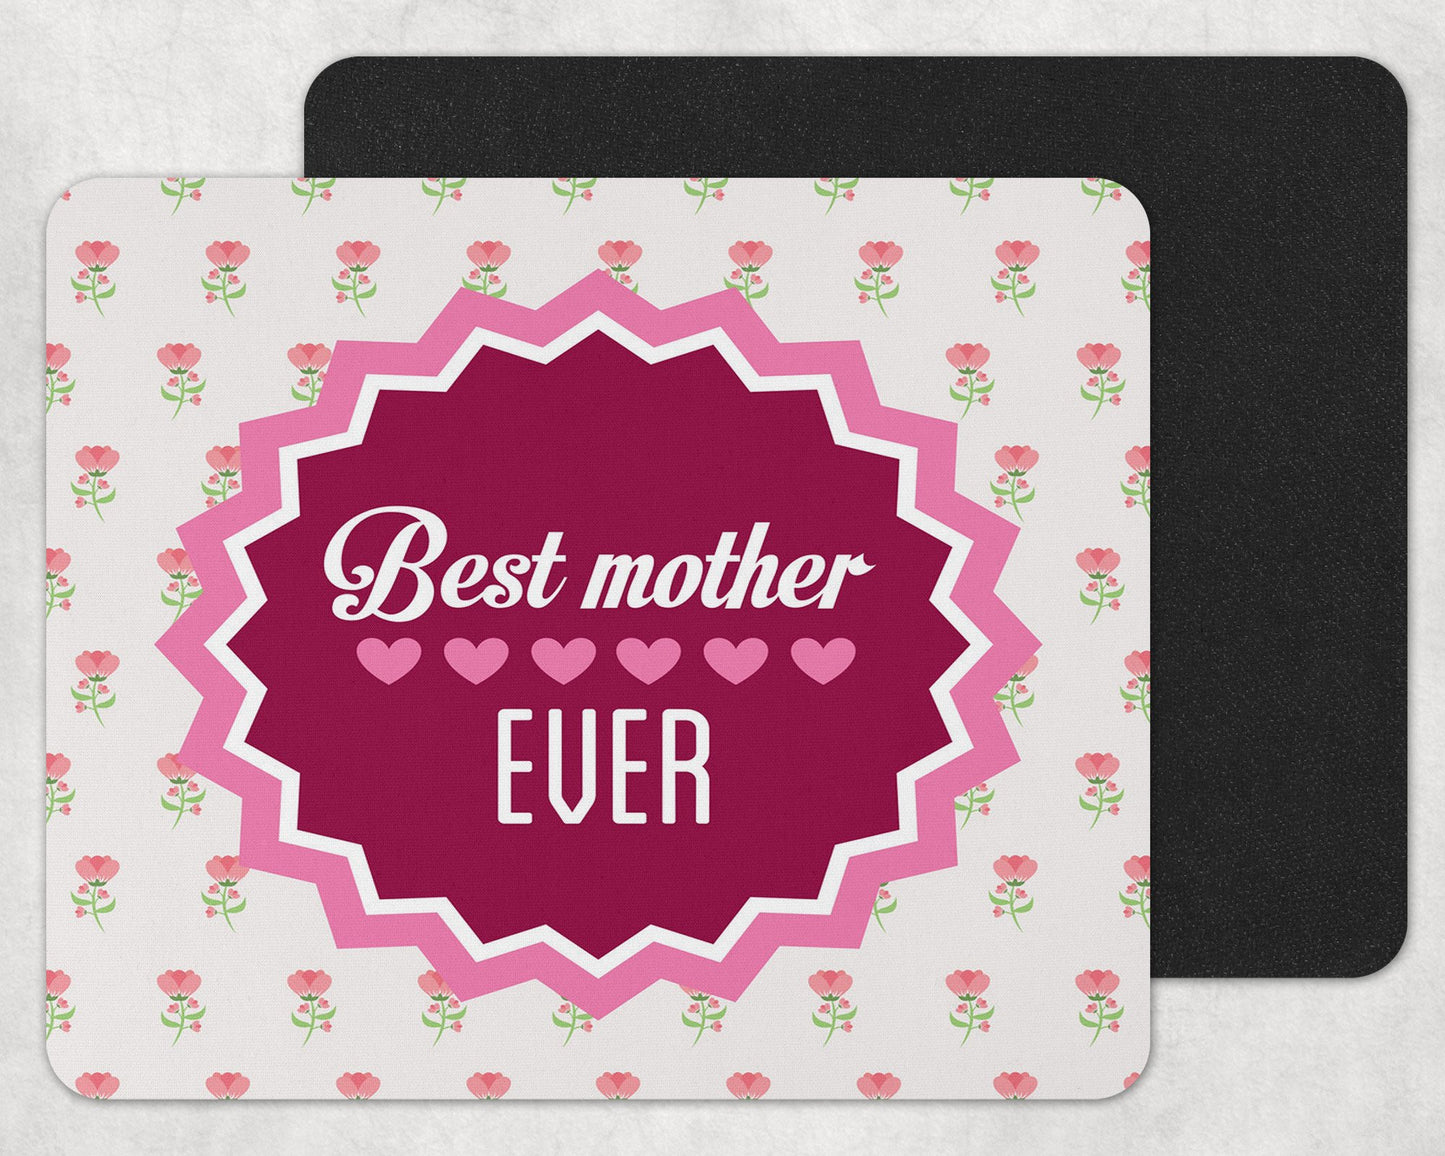 Best Mother Ever Mousepad